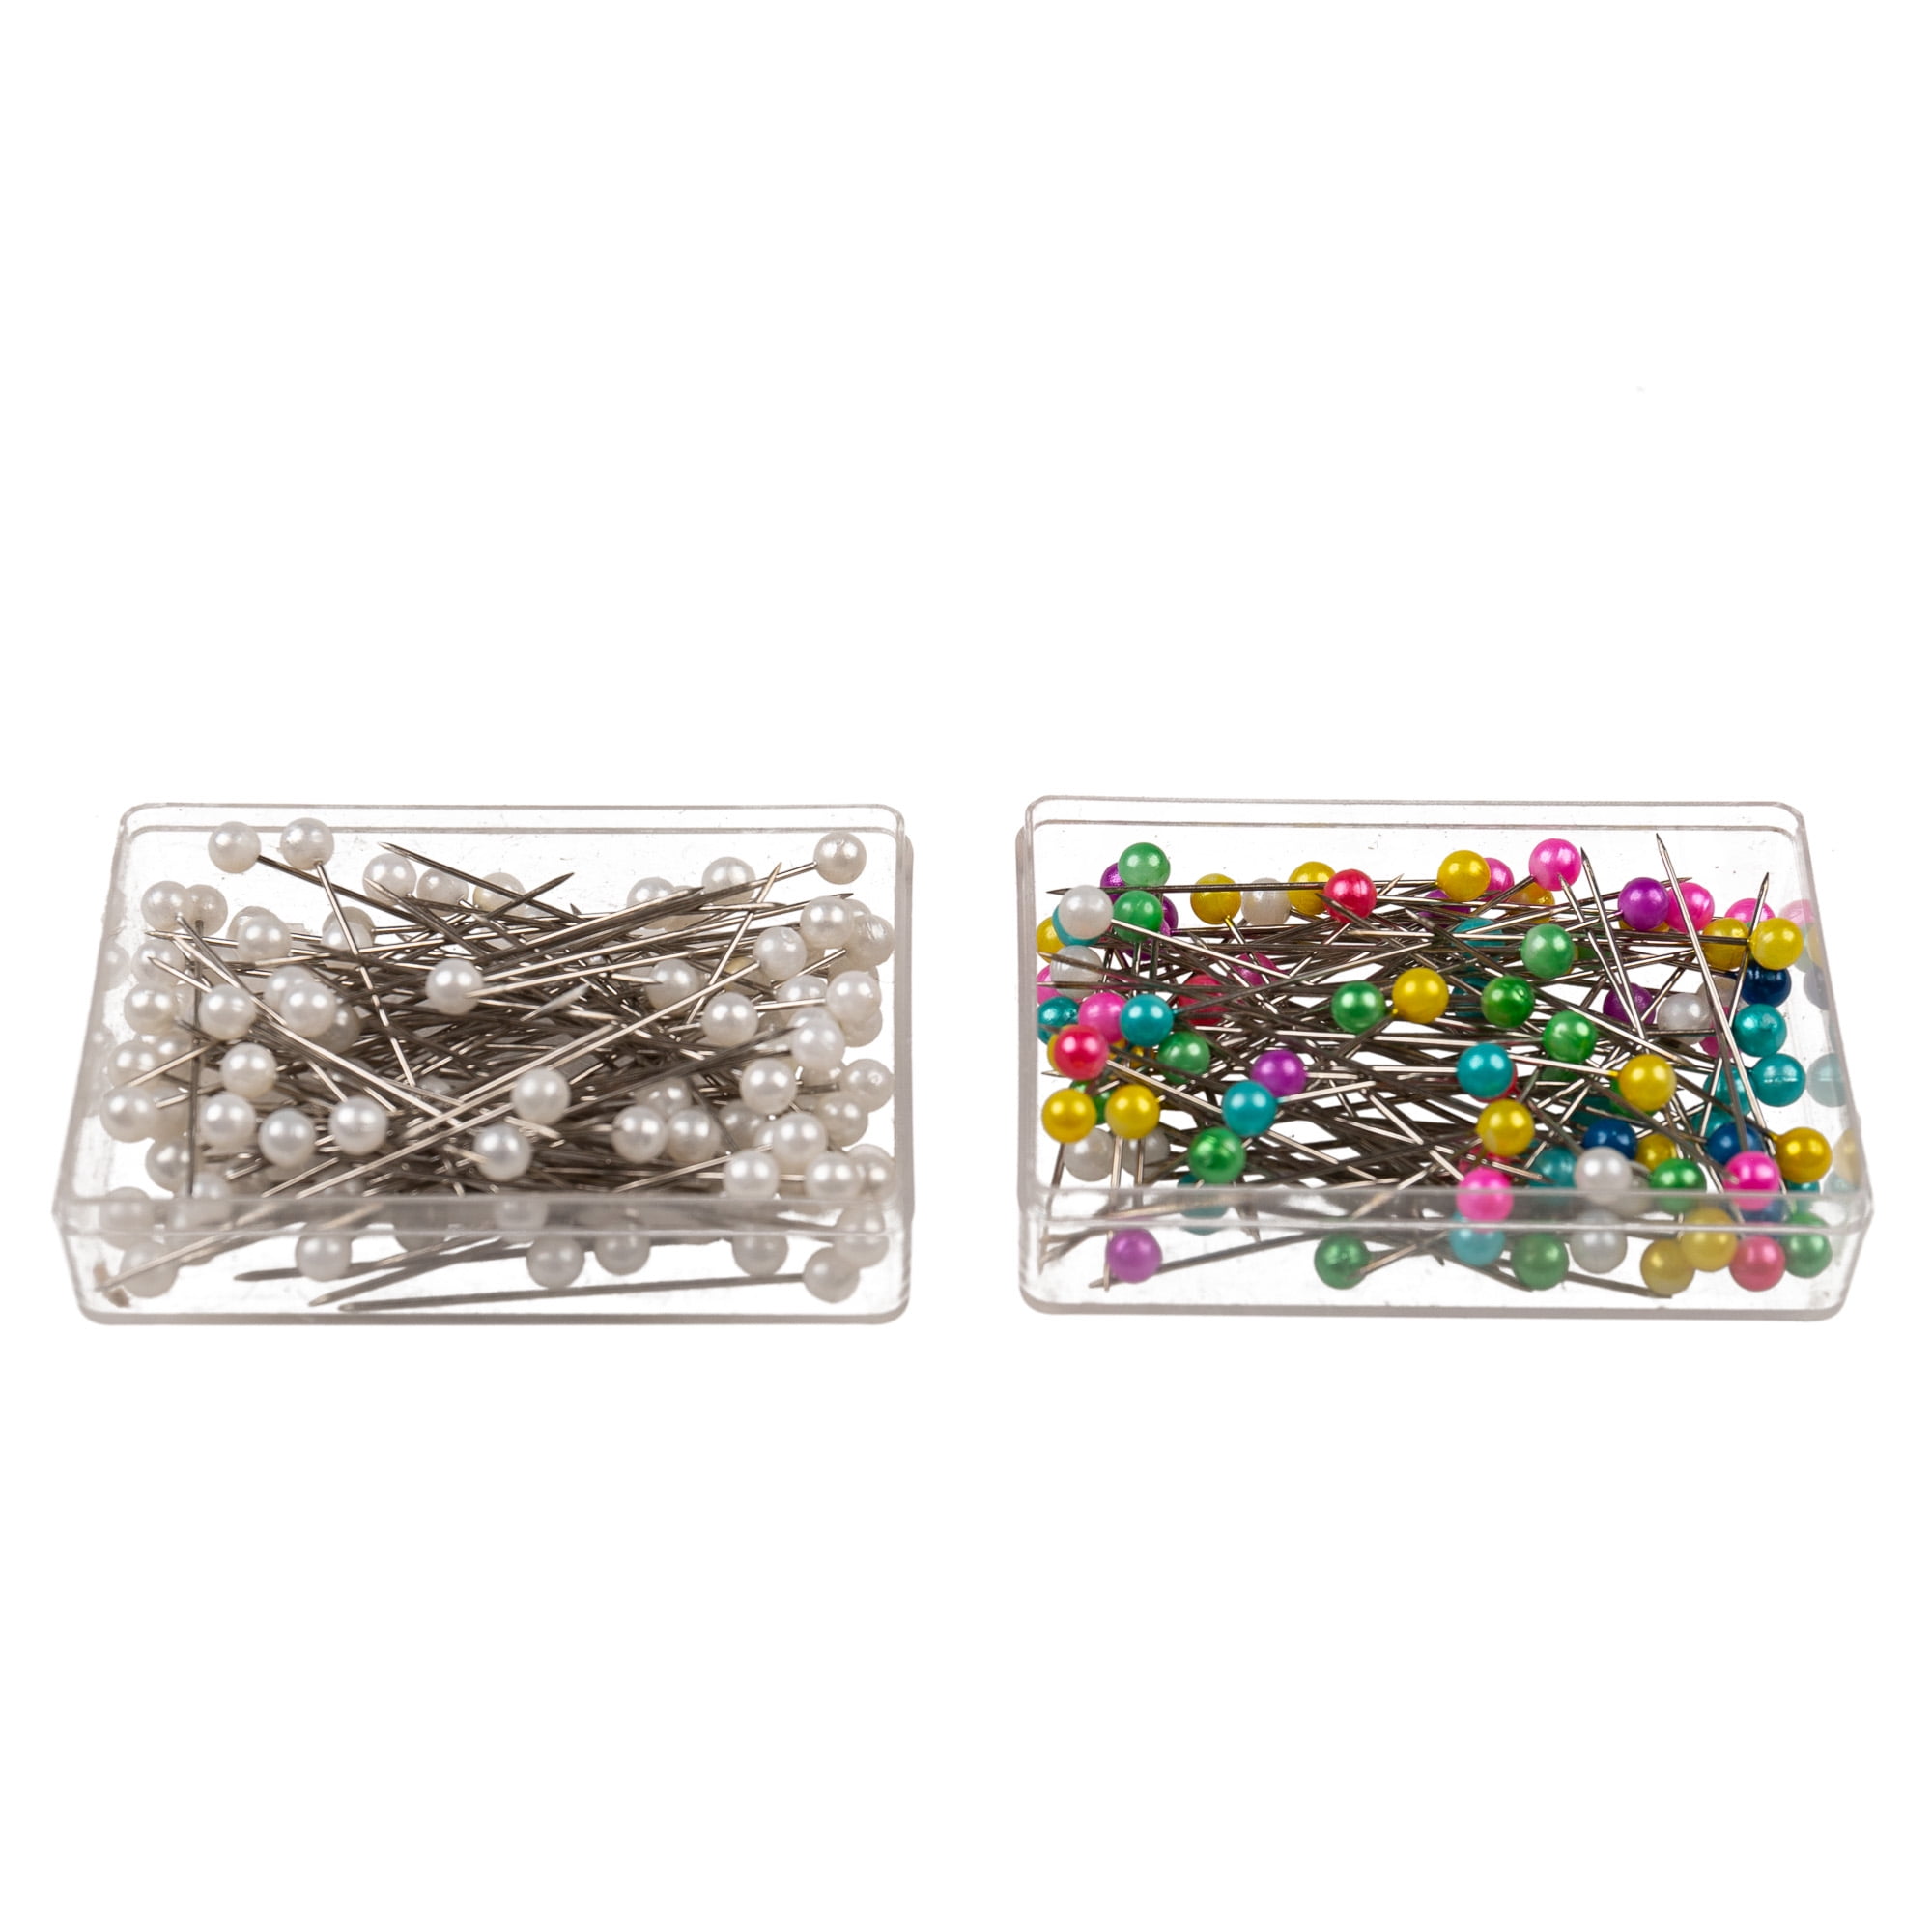 Dritz Colored Head Pins - SANE - Sewing and Housewares